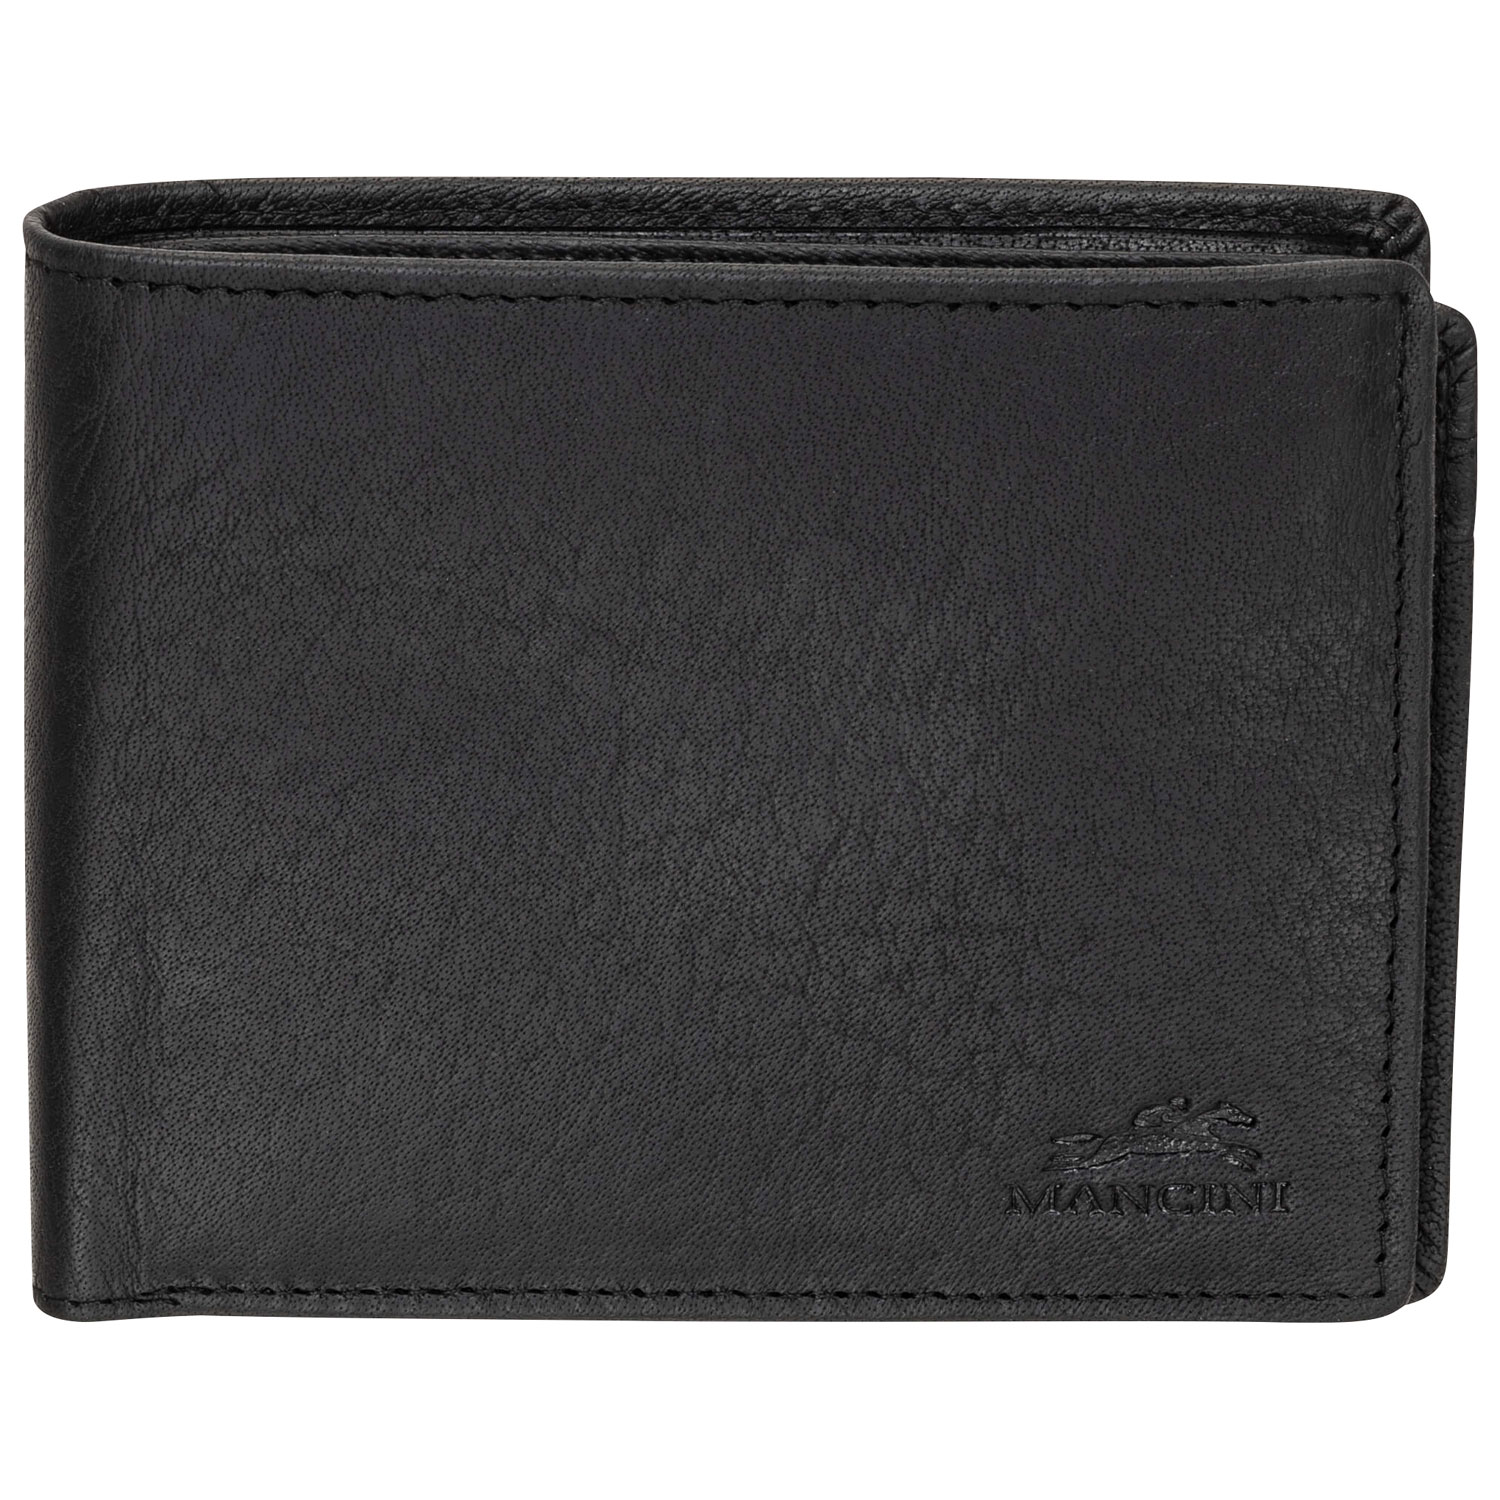 Mancini Buffalo RFID Genuine Leather Wallet with Zippered Coin Pocket - Black